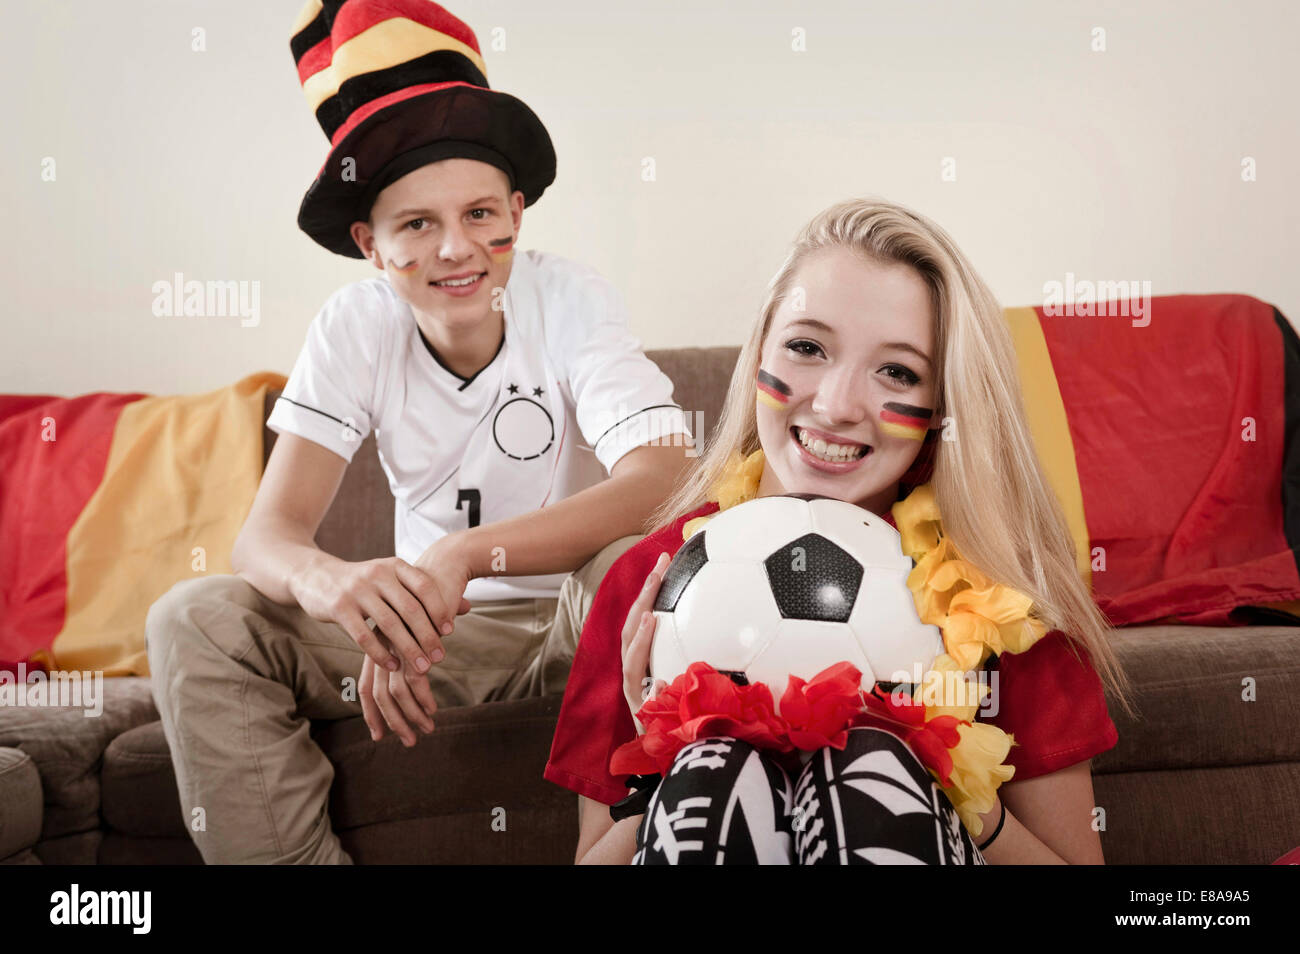 Teenage boy and girl with soccer ball in living room Stock Photo